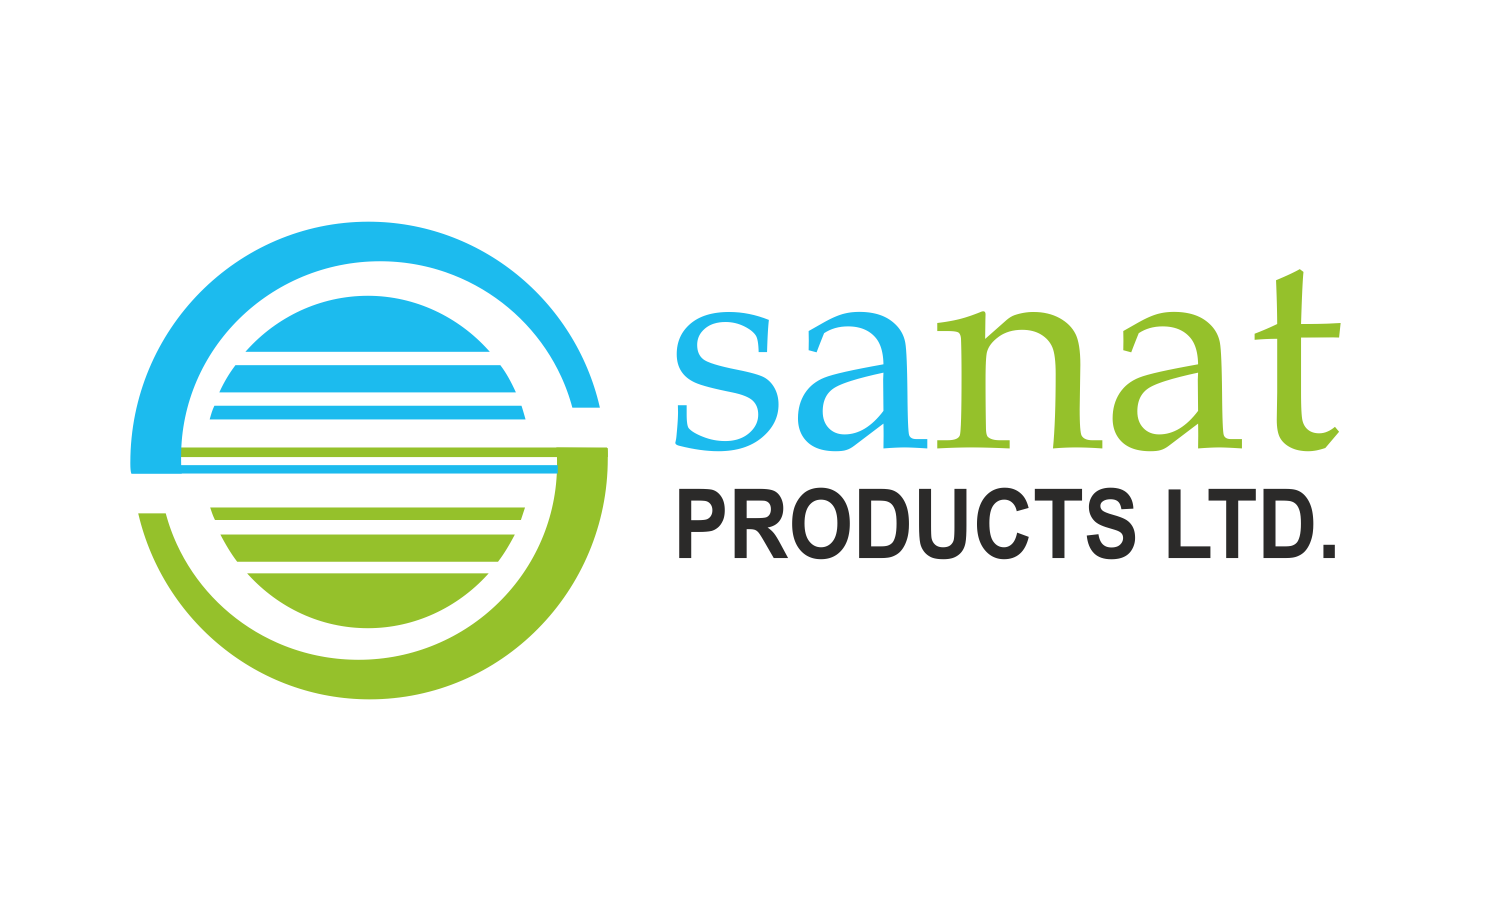 Schwabe India Acquired Sanat Products Ltd.